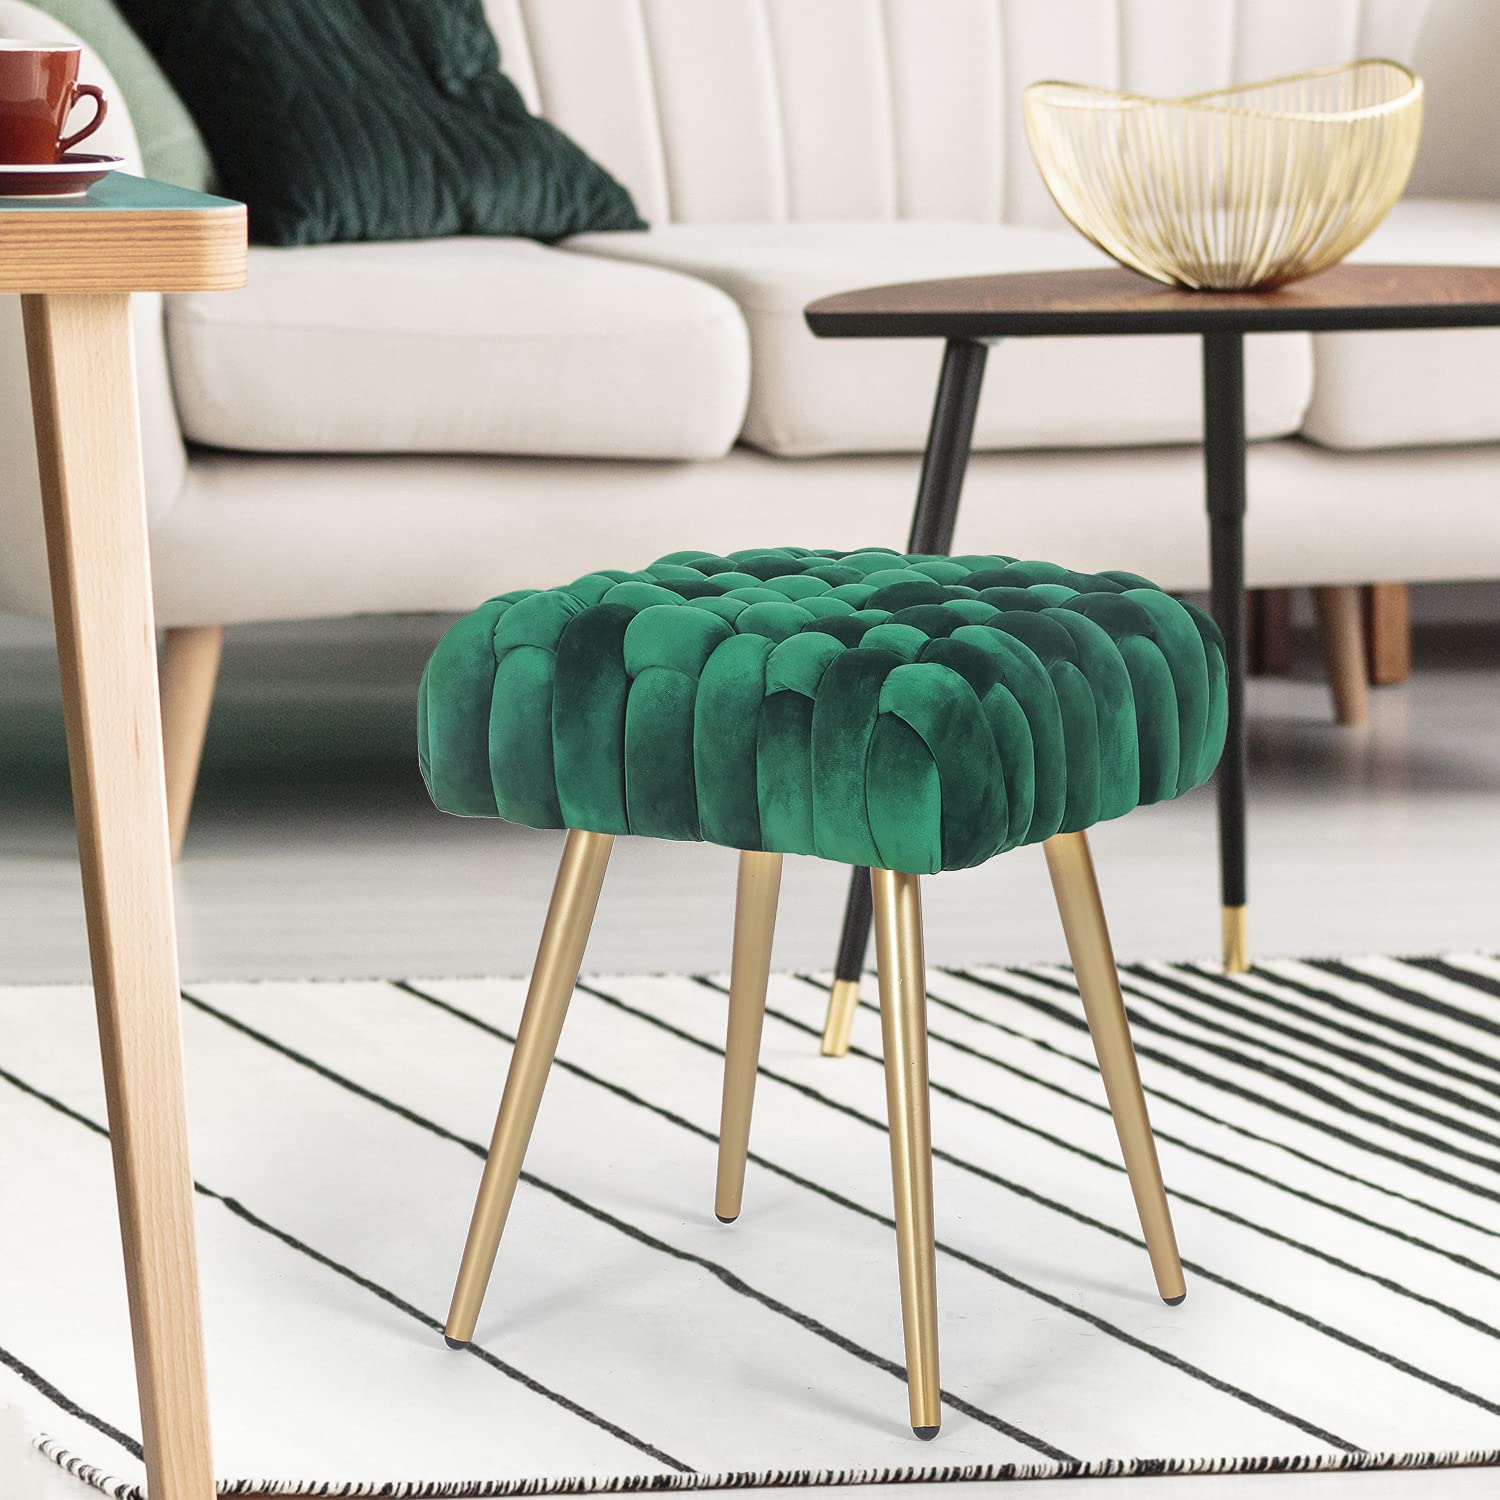 Decent Home Velvet Ottoman Footrest Stool,Tufted Fabric Upholstery Side Table Seat, Vanity Dressing Bench,Knit Lines Chair with Metal Legs for Living Room, Bedroom (Dark Green)